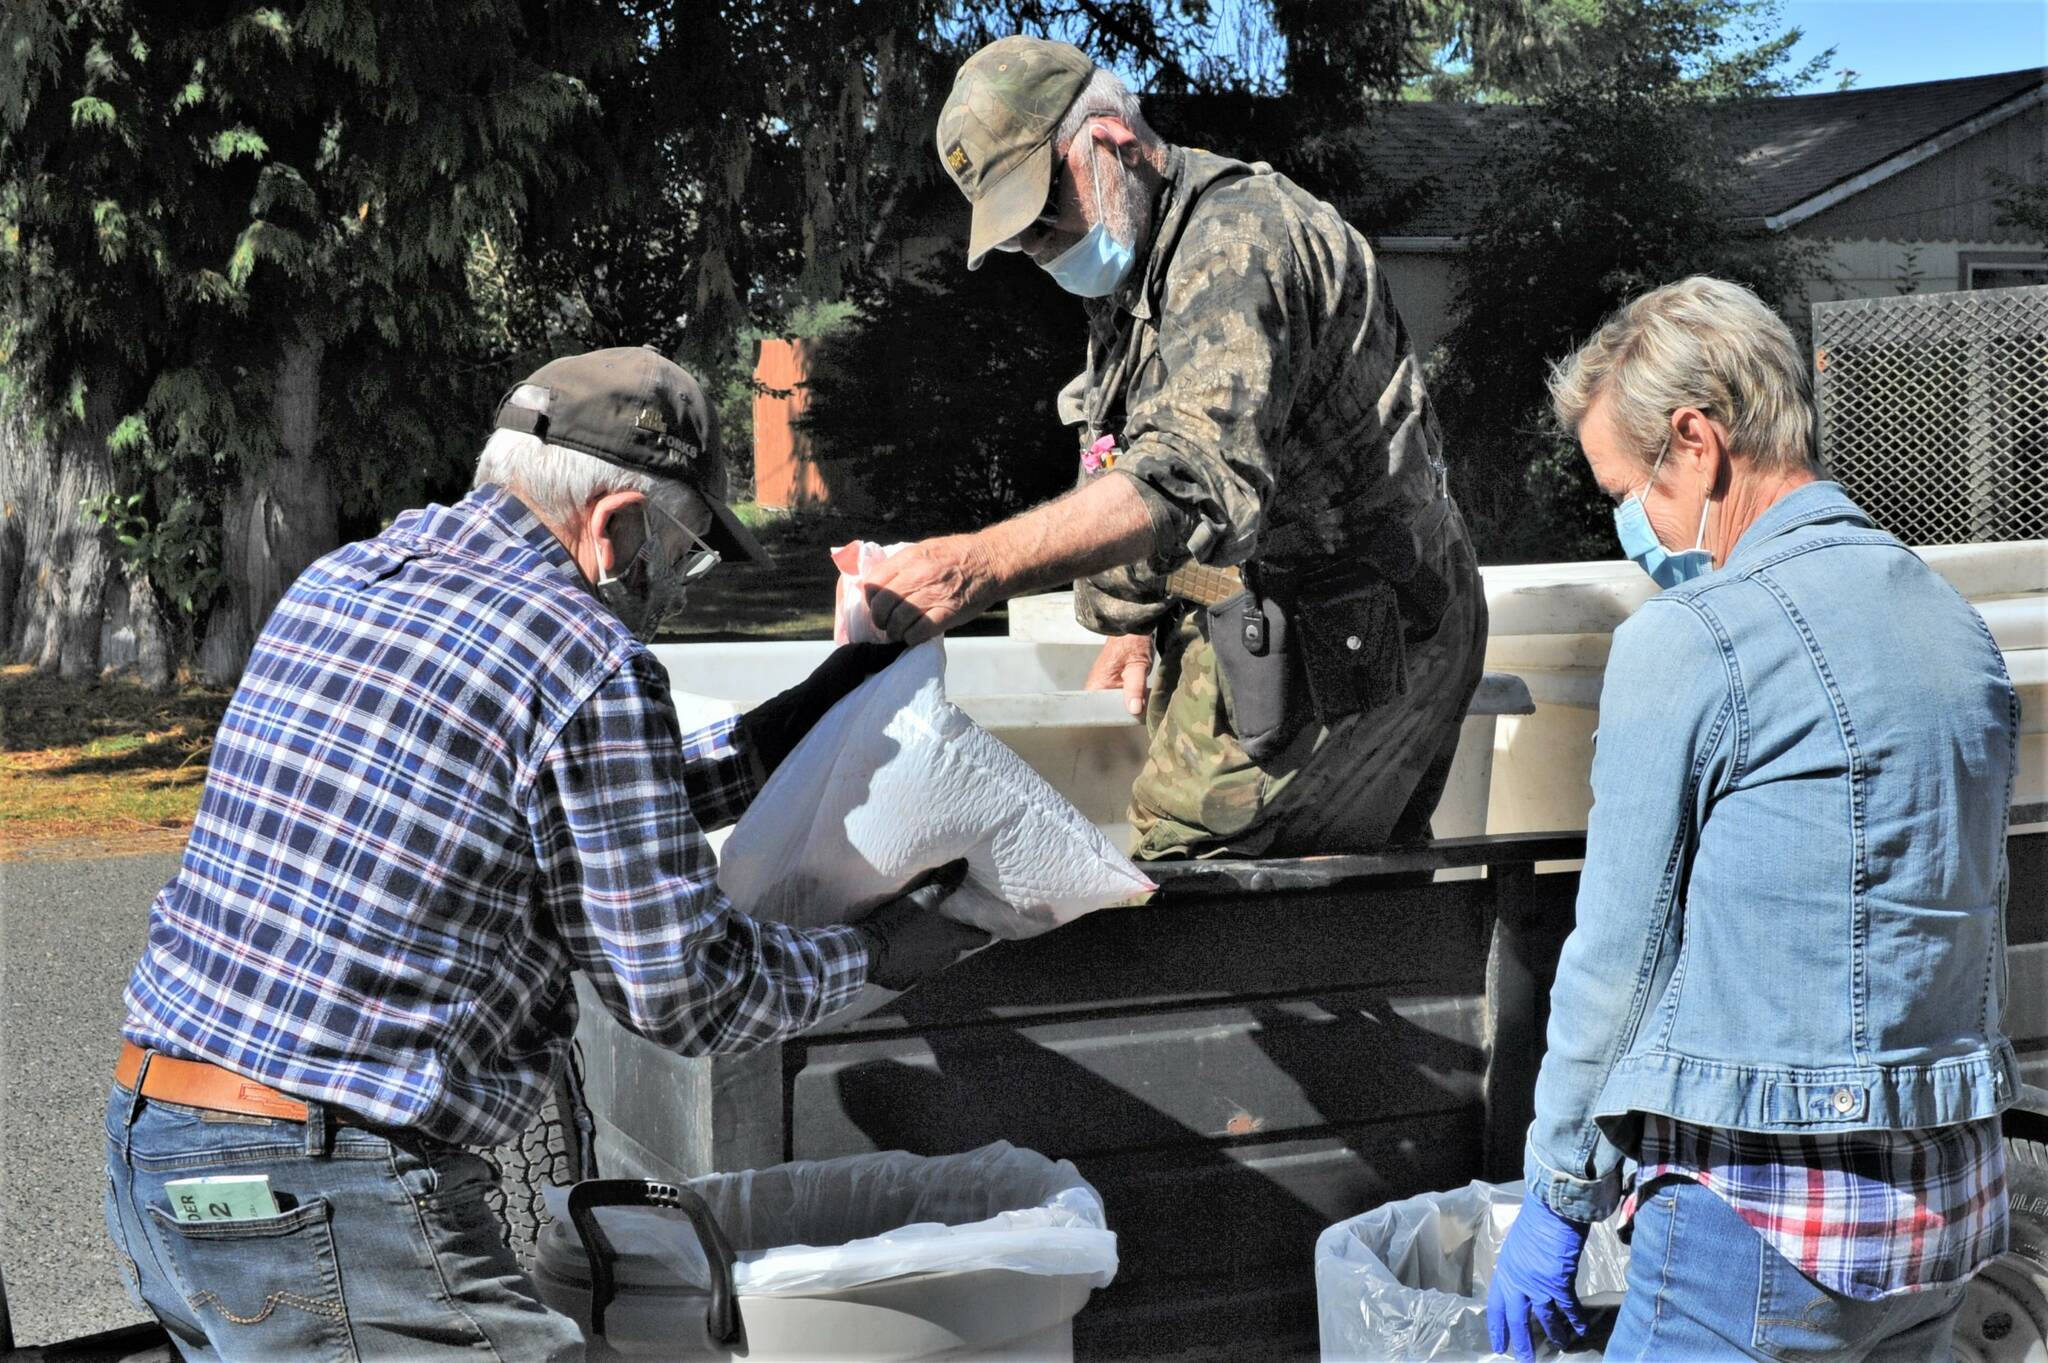 Wayne Haag (center) hands fish fillets to Glenn King and Terri Rasmussen of the Forks Food Bank.  The masons also received fish for distribution, as did several individual families.  That day, 160 Coho were treated by PCSC volunteers.